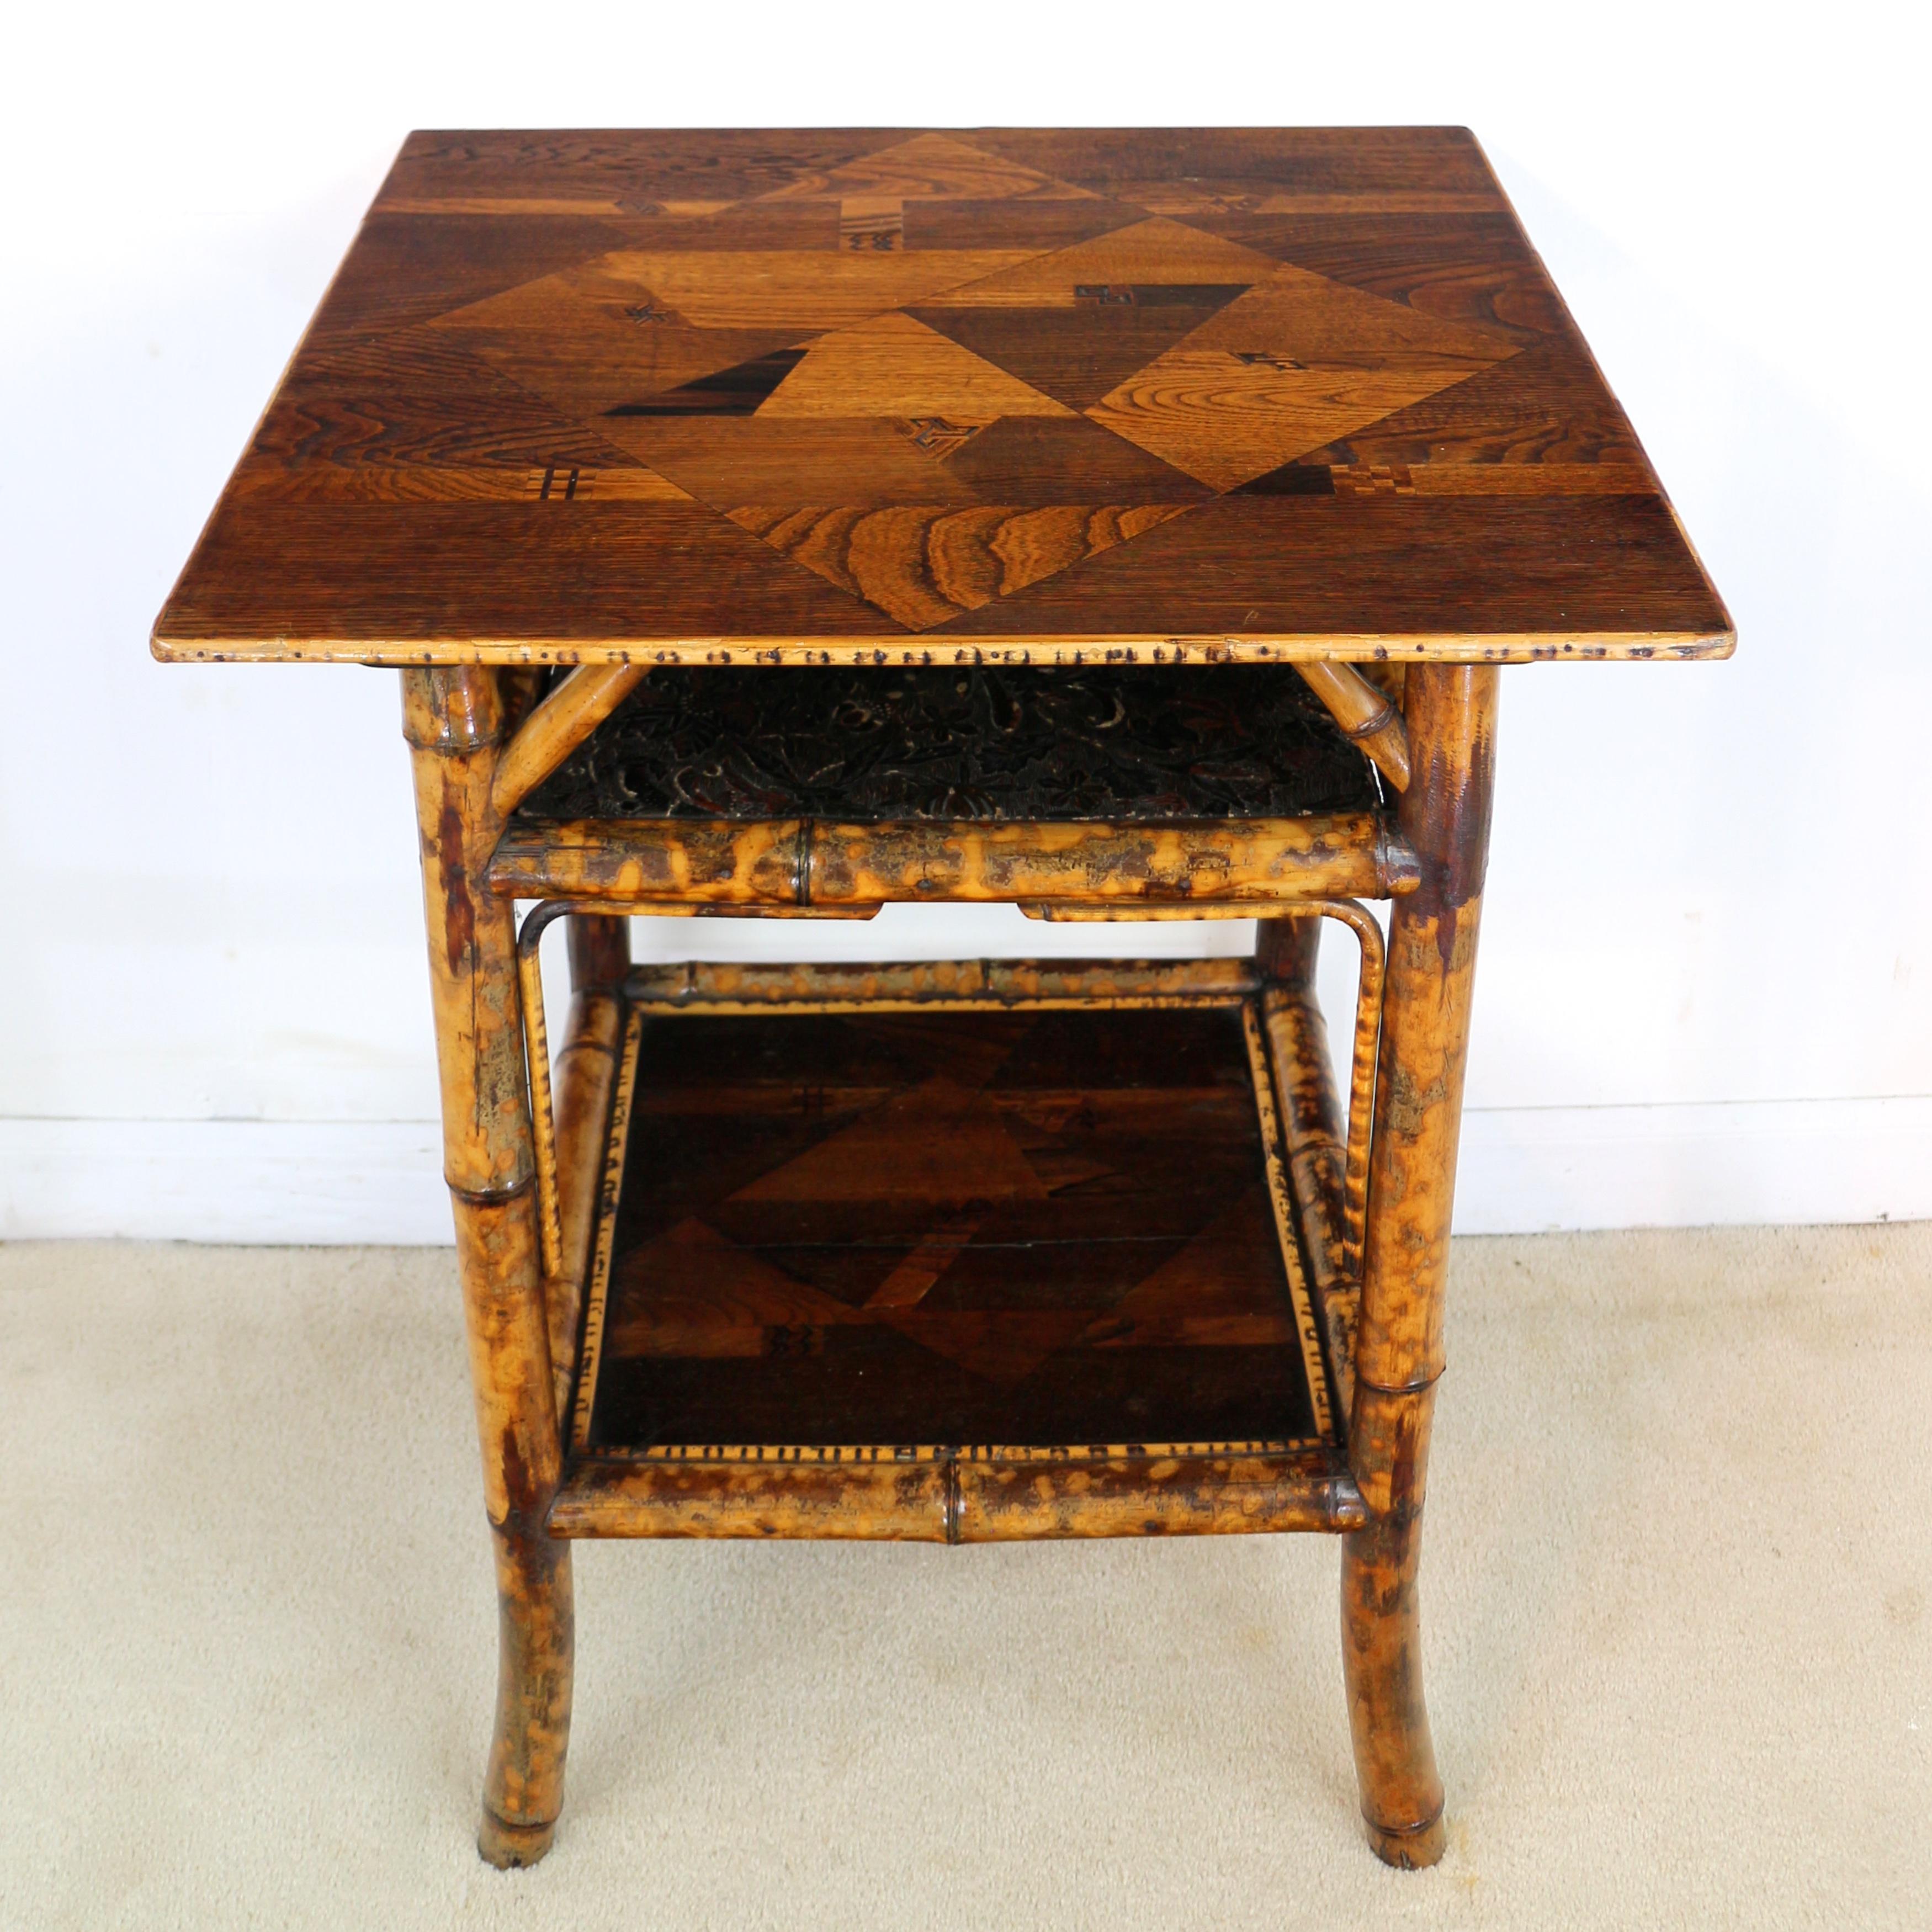 An unusual late Victorian bamboo occasional table with a Japanese parquetry top and bamboo supports with simulated tortoiseshell colouring. The cane edged square top inlaid with a geometric design in various specimen woods and similarly inlaid lower